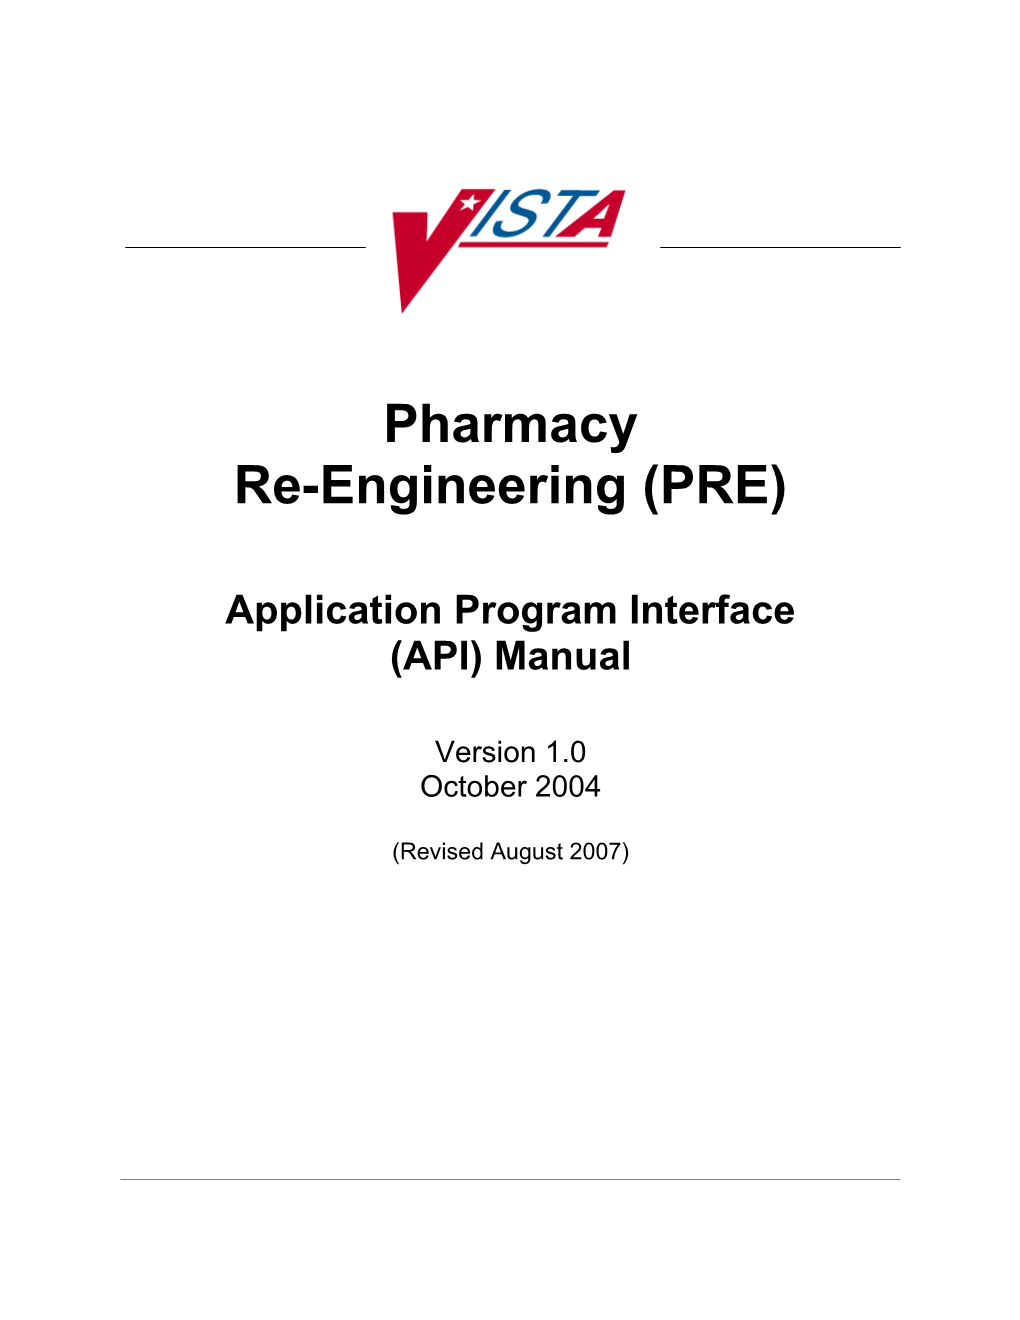 Department of Veterans Affairs Pharmacy Re-Engineering (PRE) Application Program Interface s1